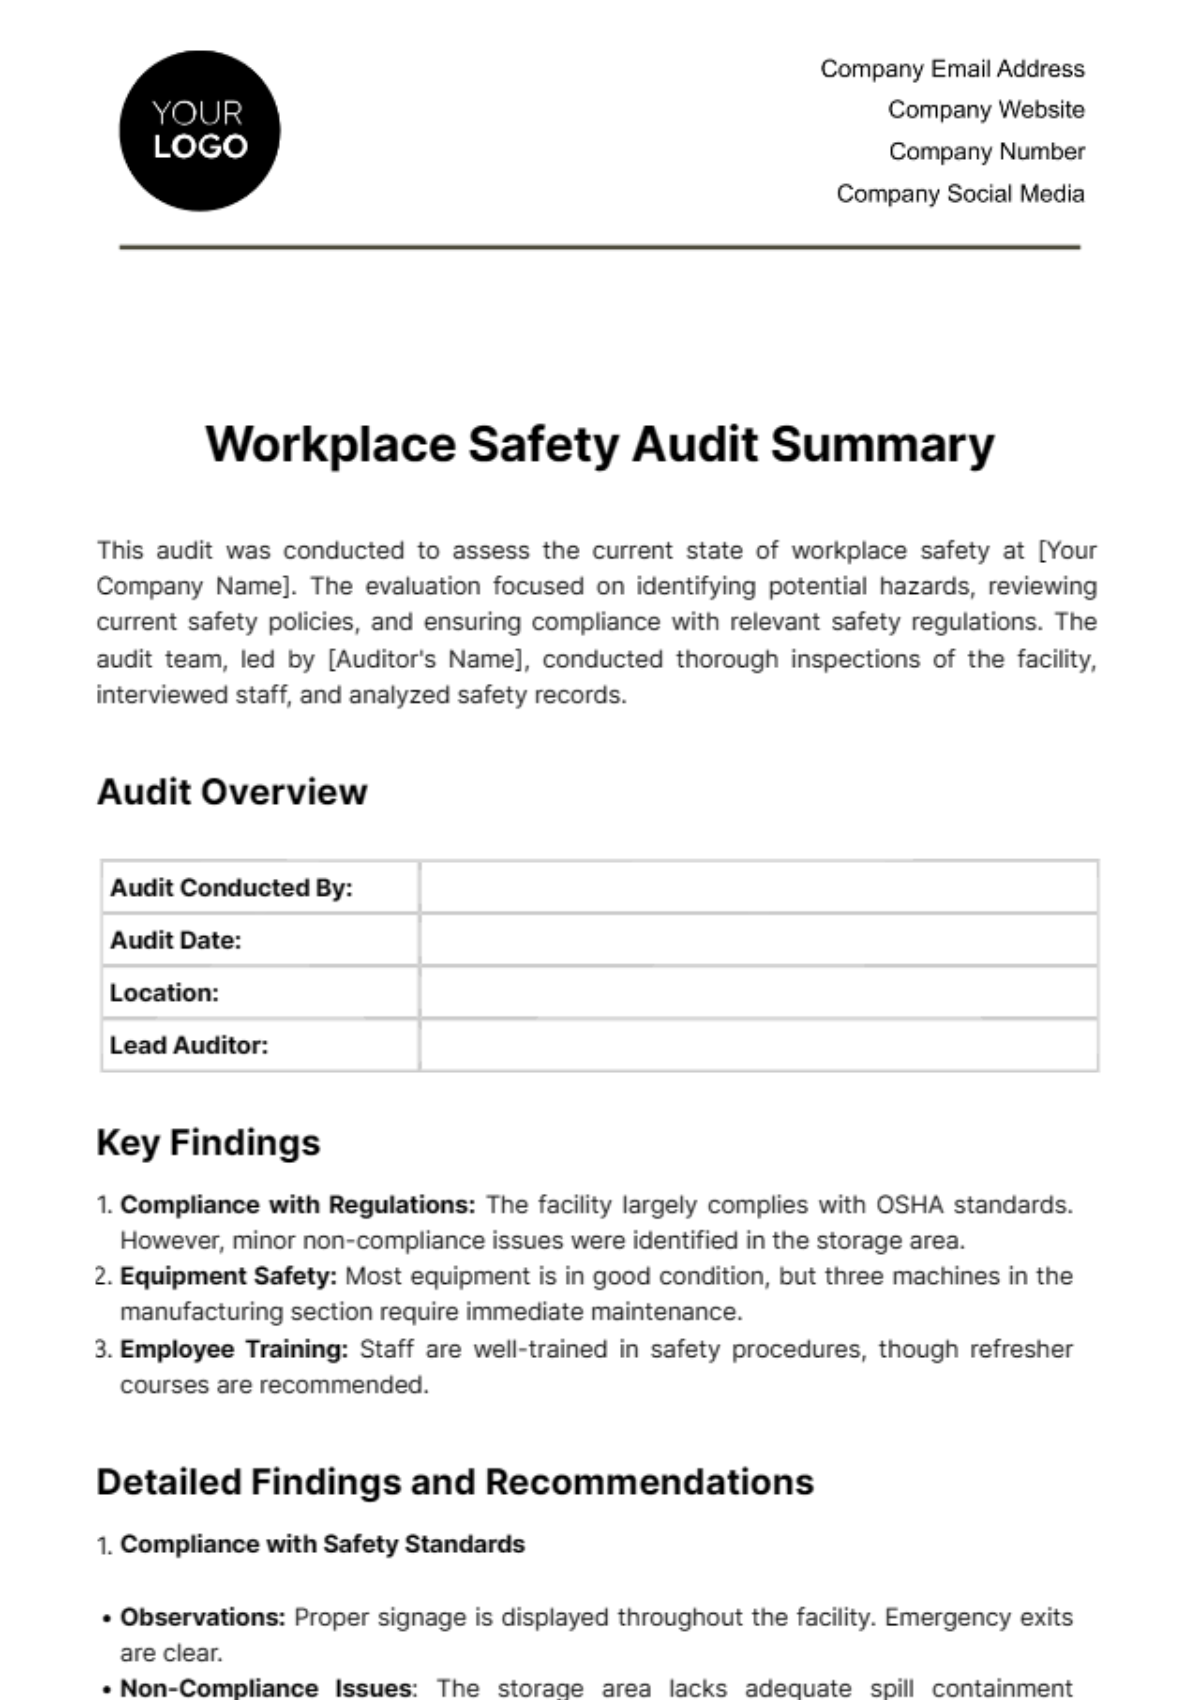 Free Workplace Safety Audit Summary Template